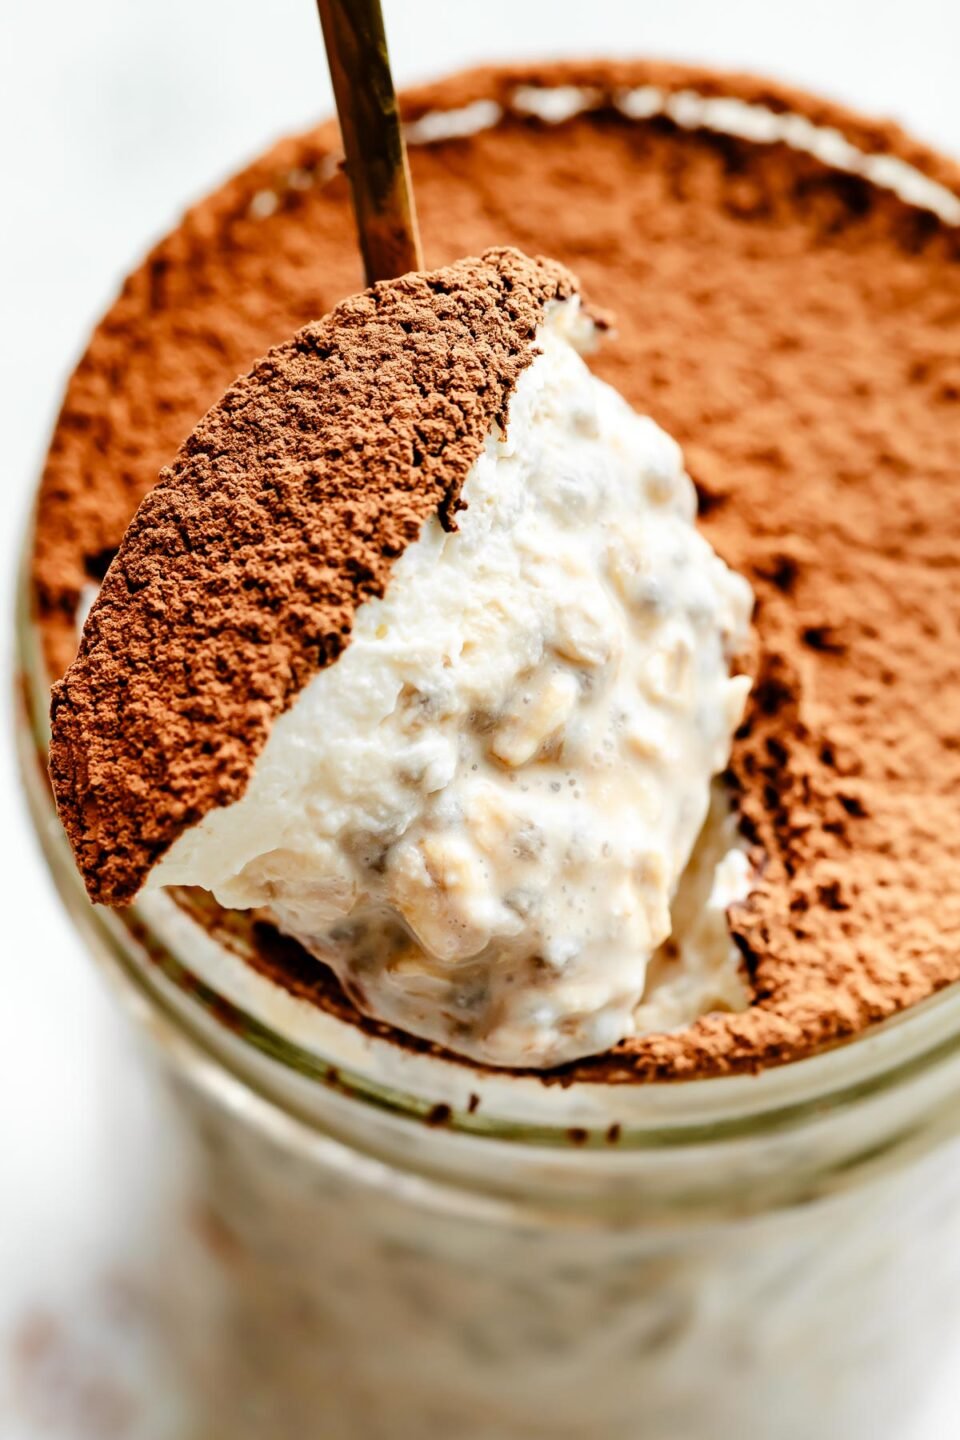 A close-up macro shot of a spoon holding up overnight oats topped with whipped cream and espresso powder over a jar of overnight oats.